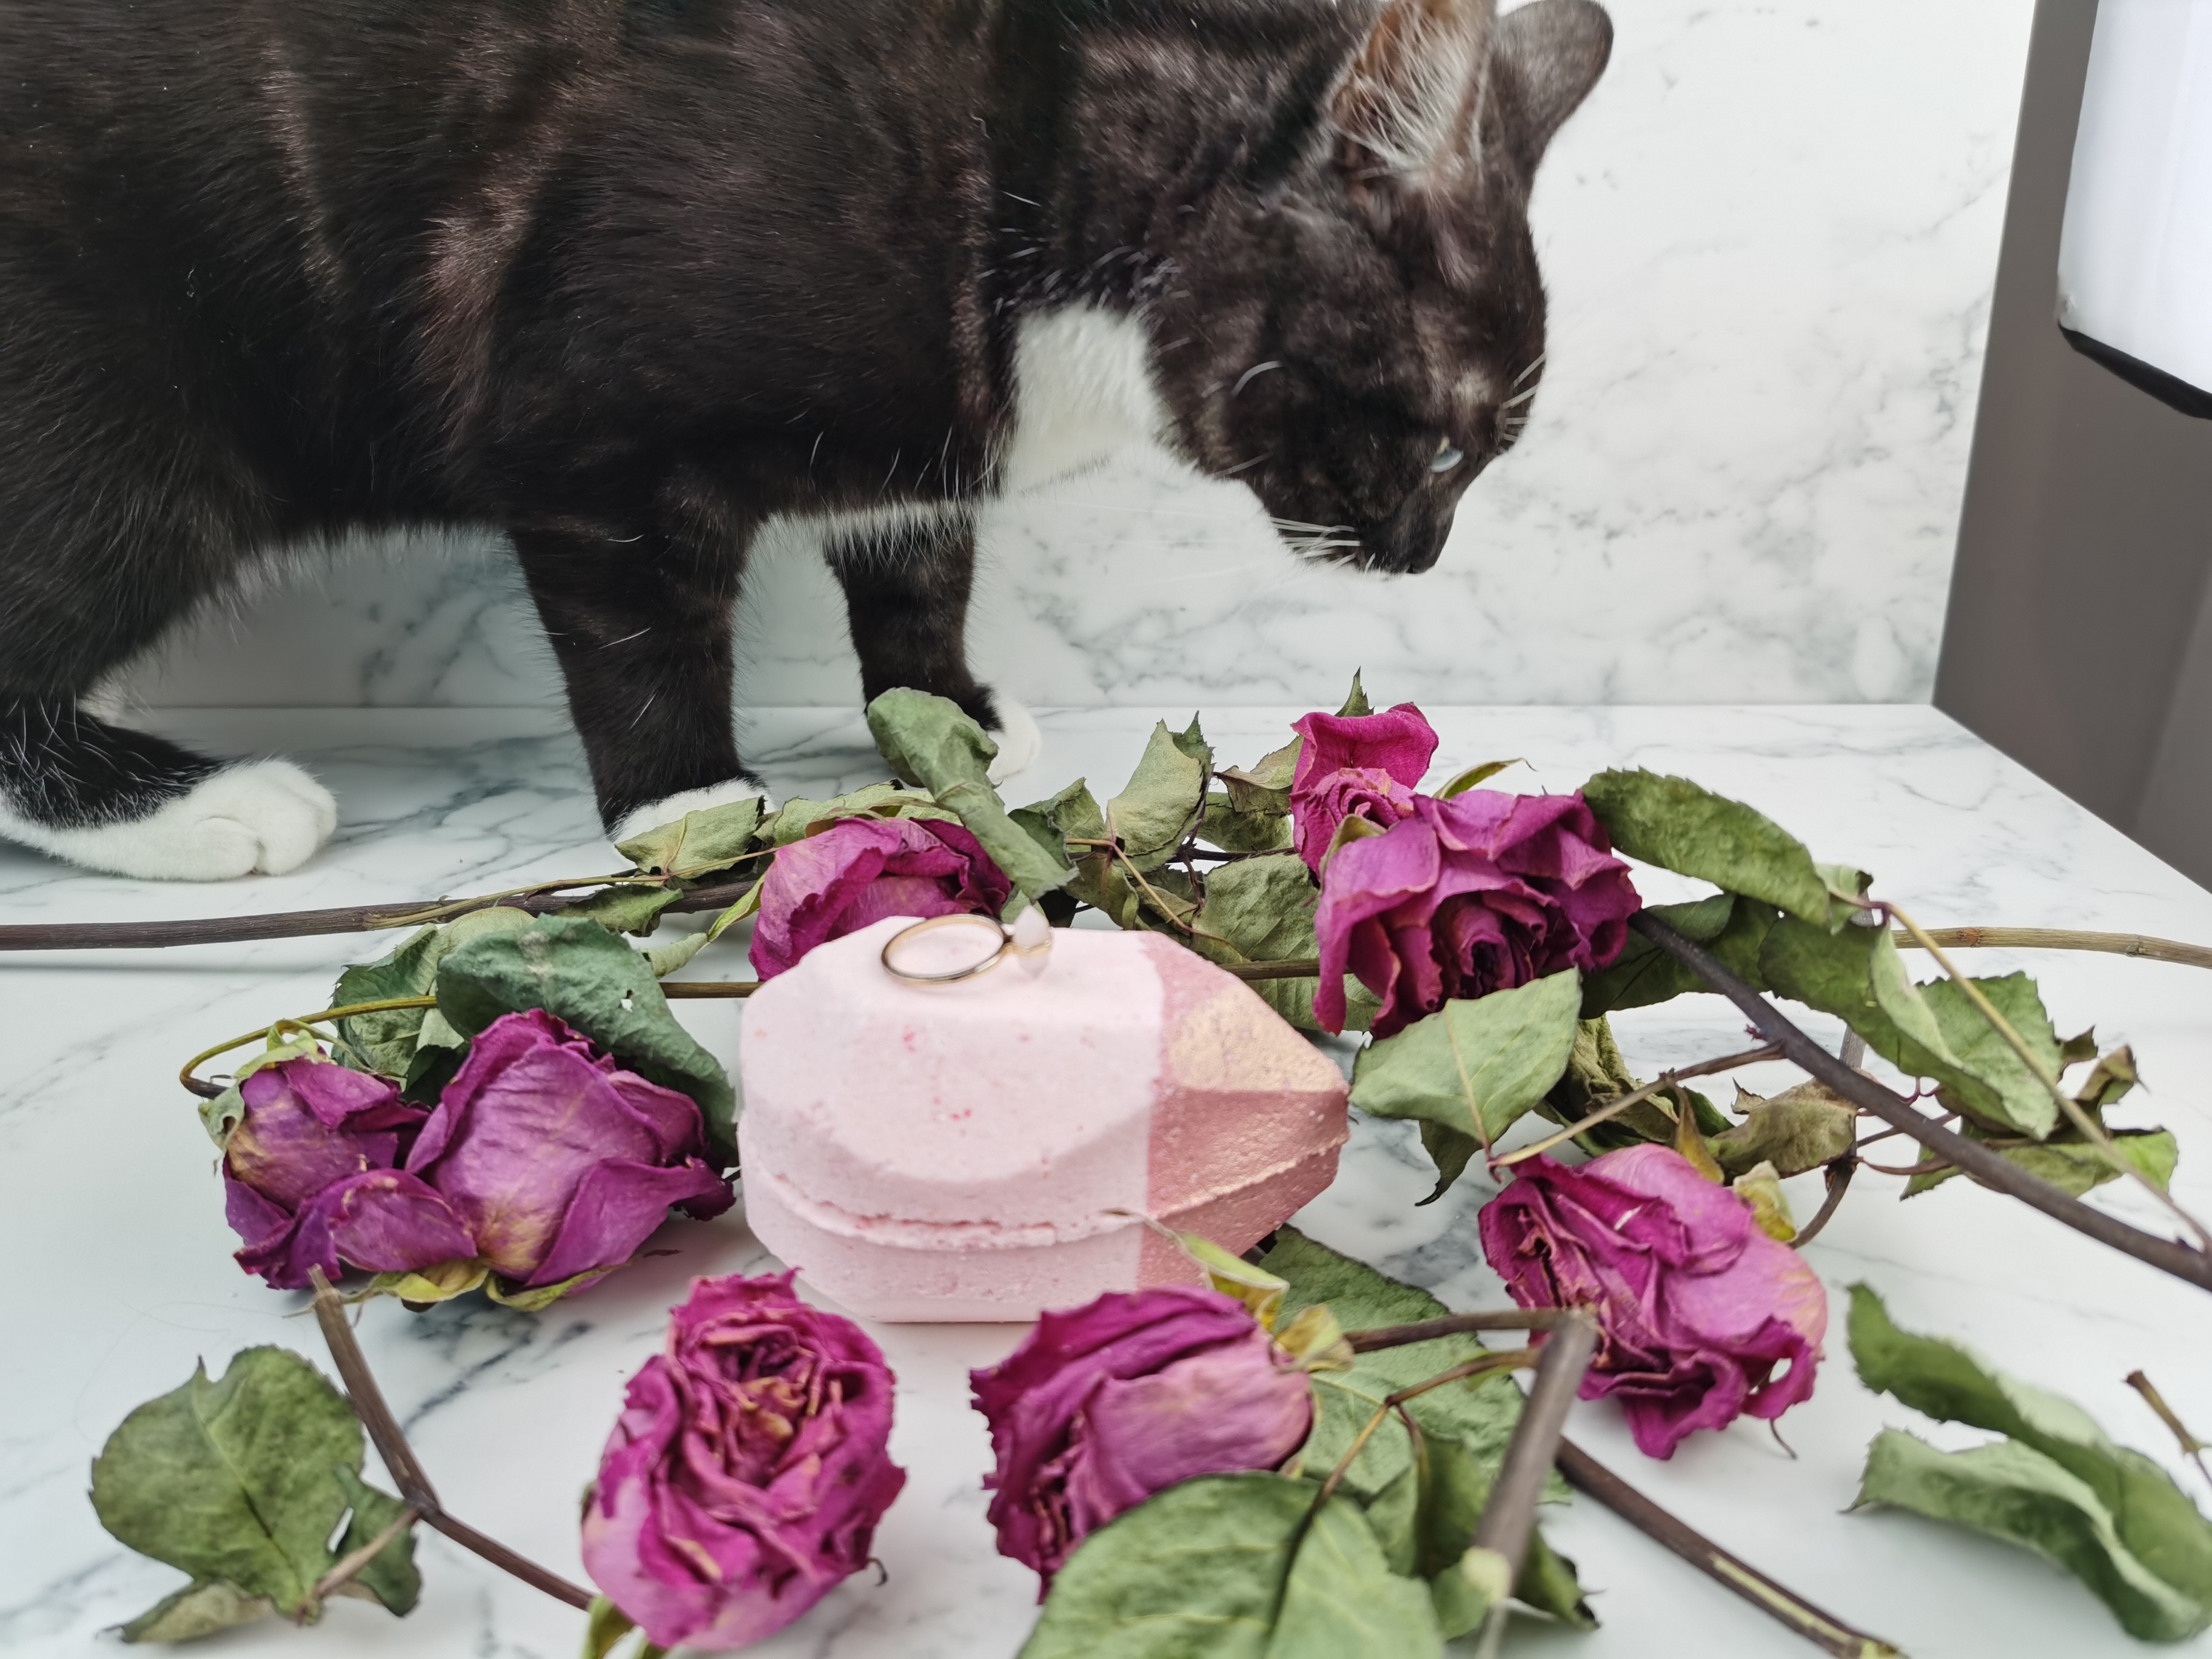 Rose Gold Shimmer Bath Bomb by Pearl Bath Bombs with flowers and cat on a marble background